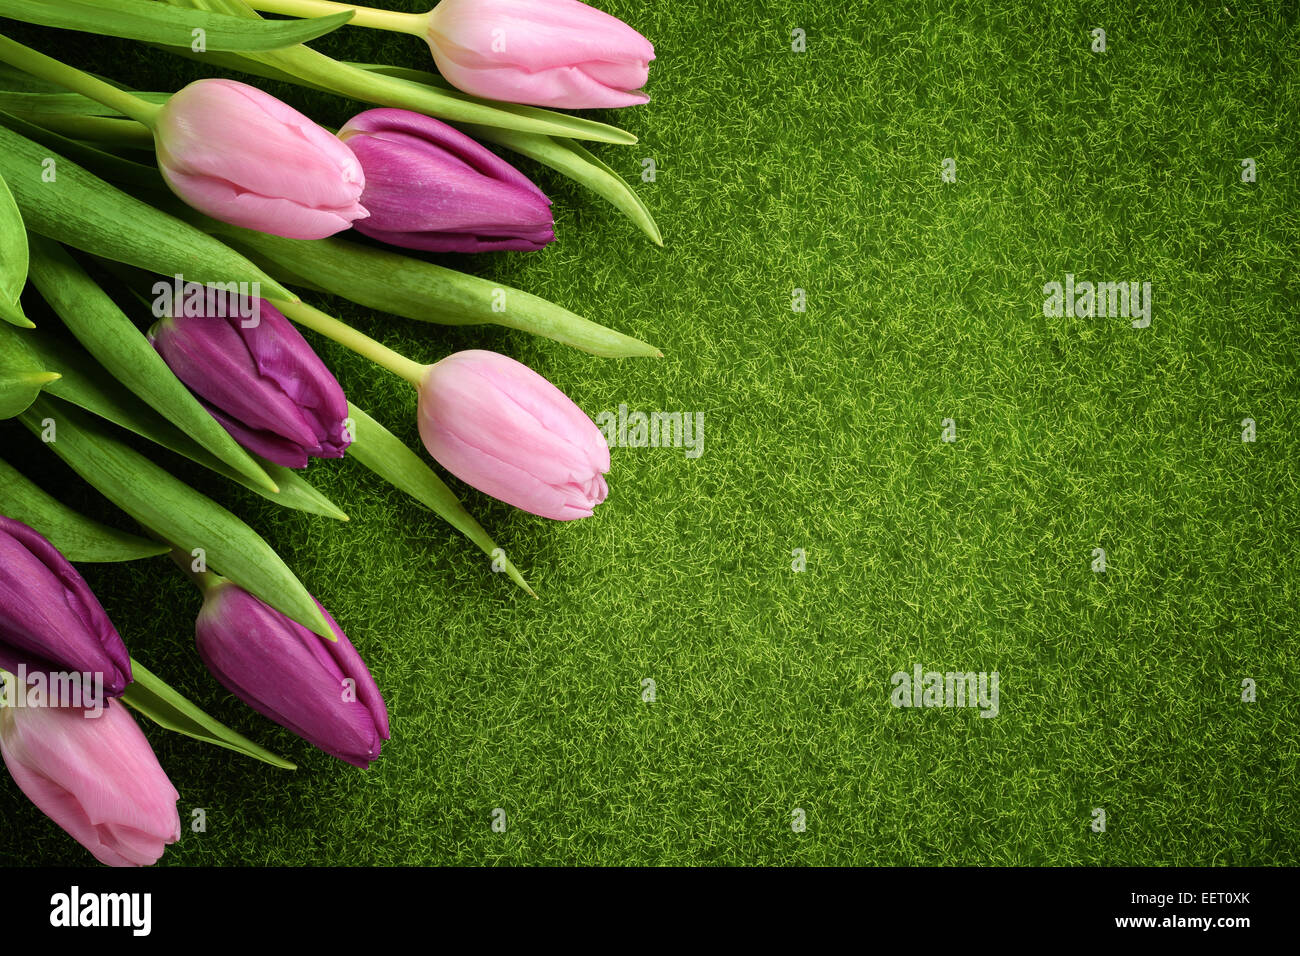 Tulipe rose on meadow Banque D'Images